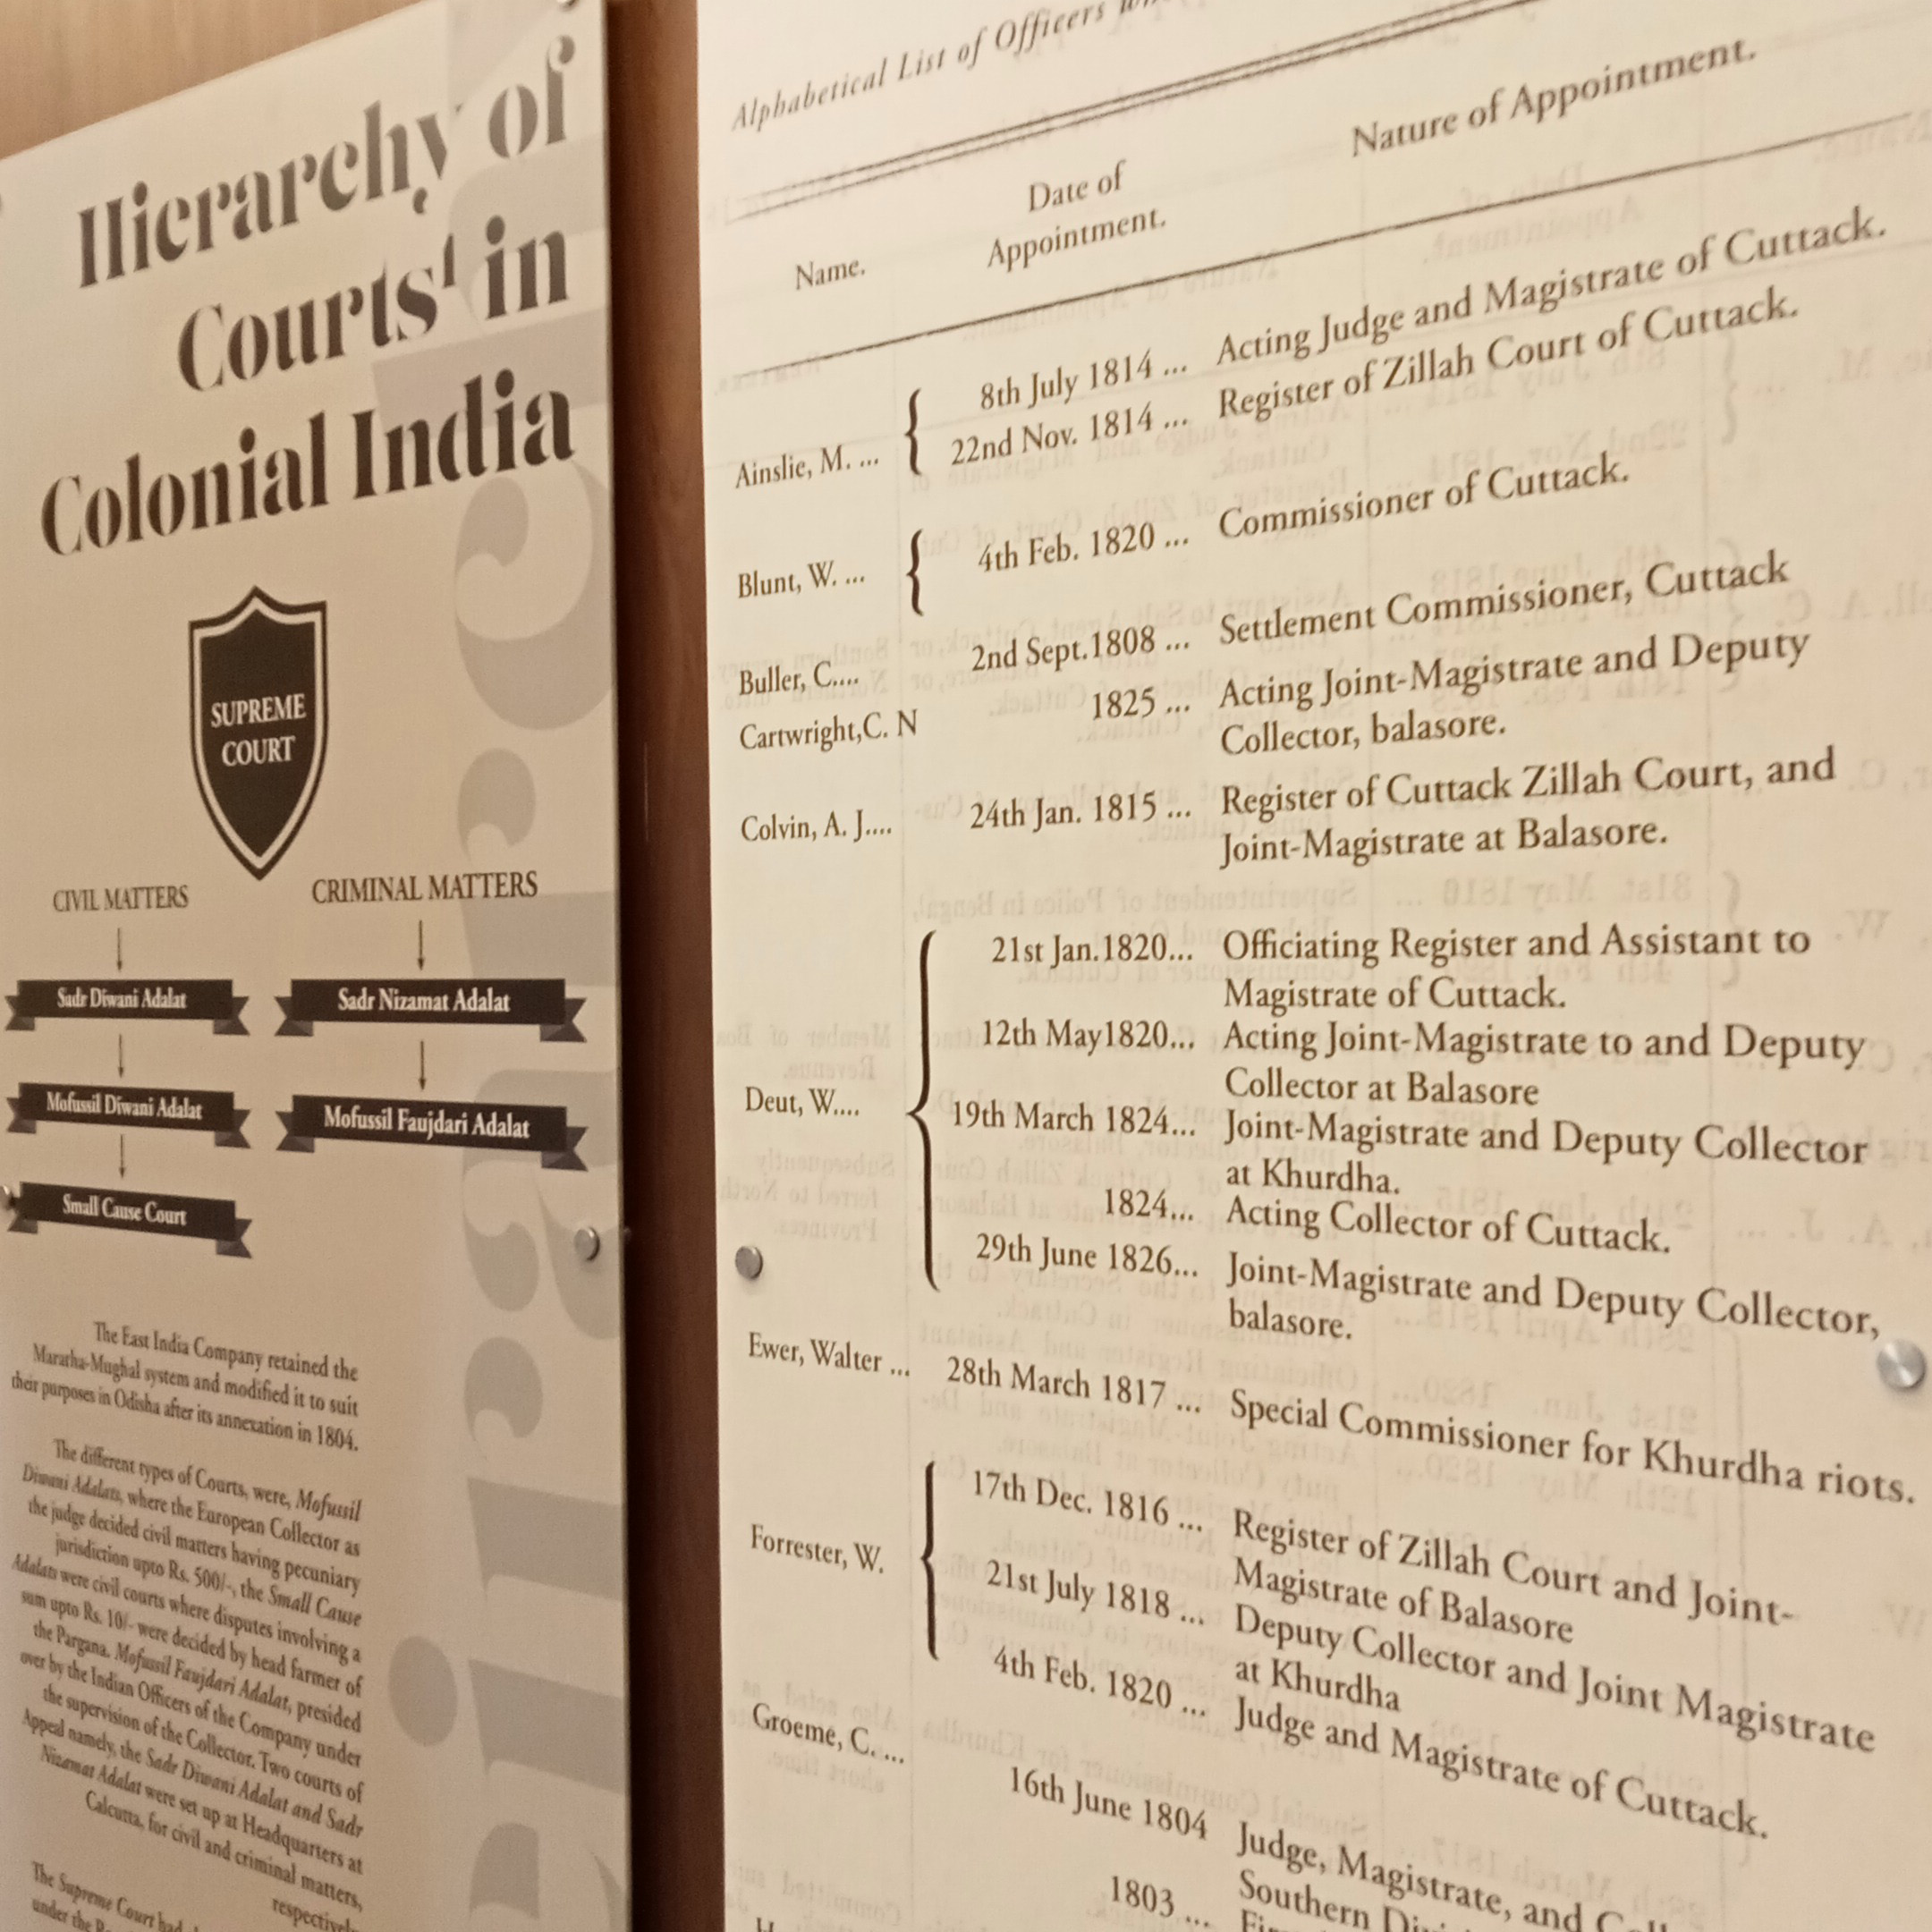 'Hierarchy of Courts in Colonial India', Interpretation panel at Museum of Justice